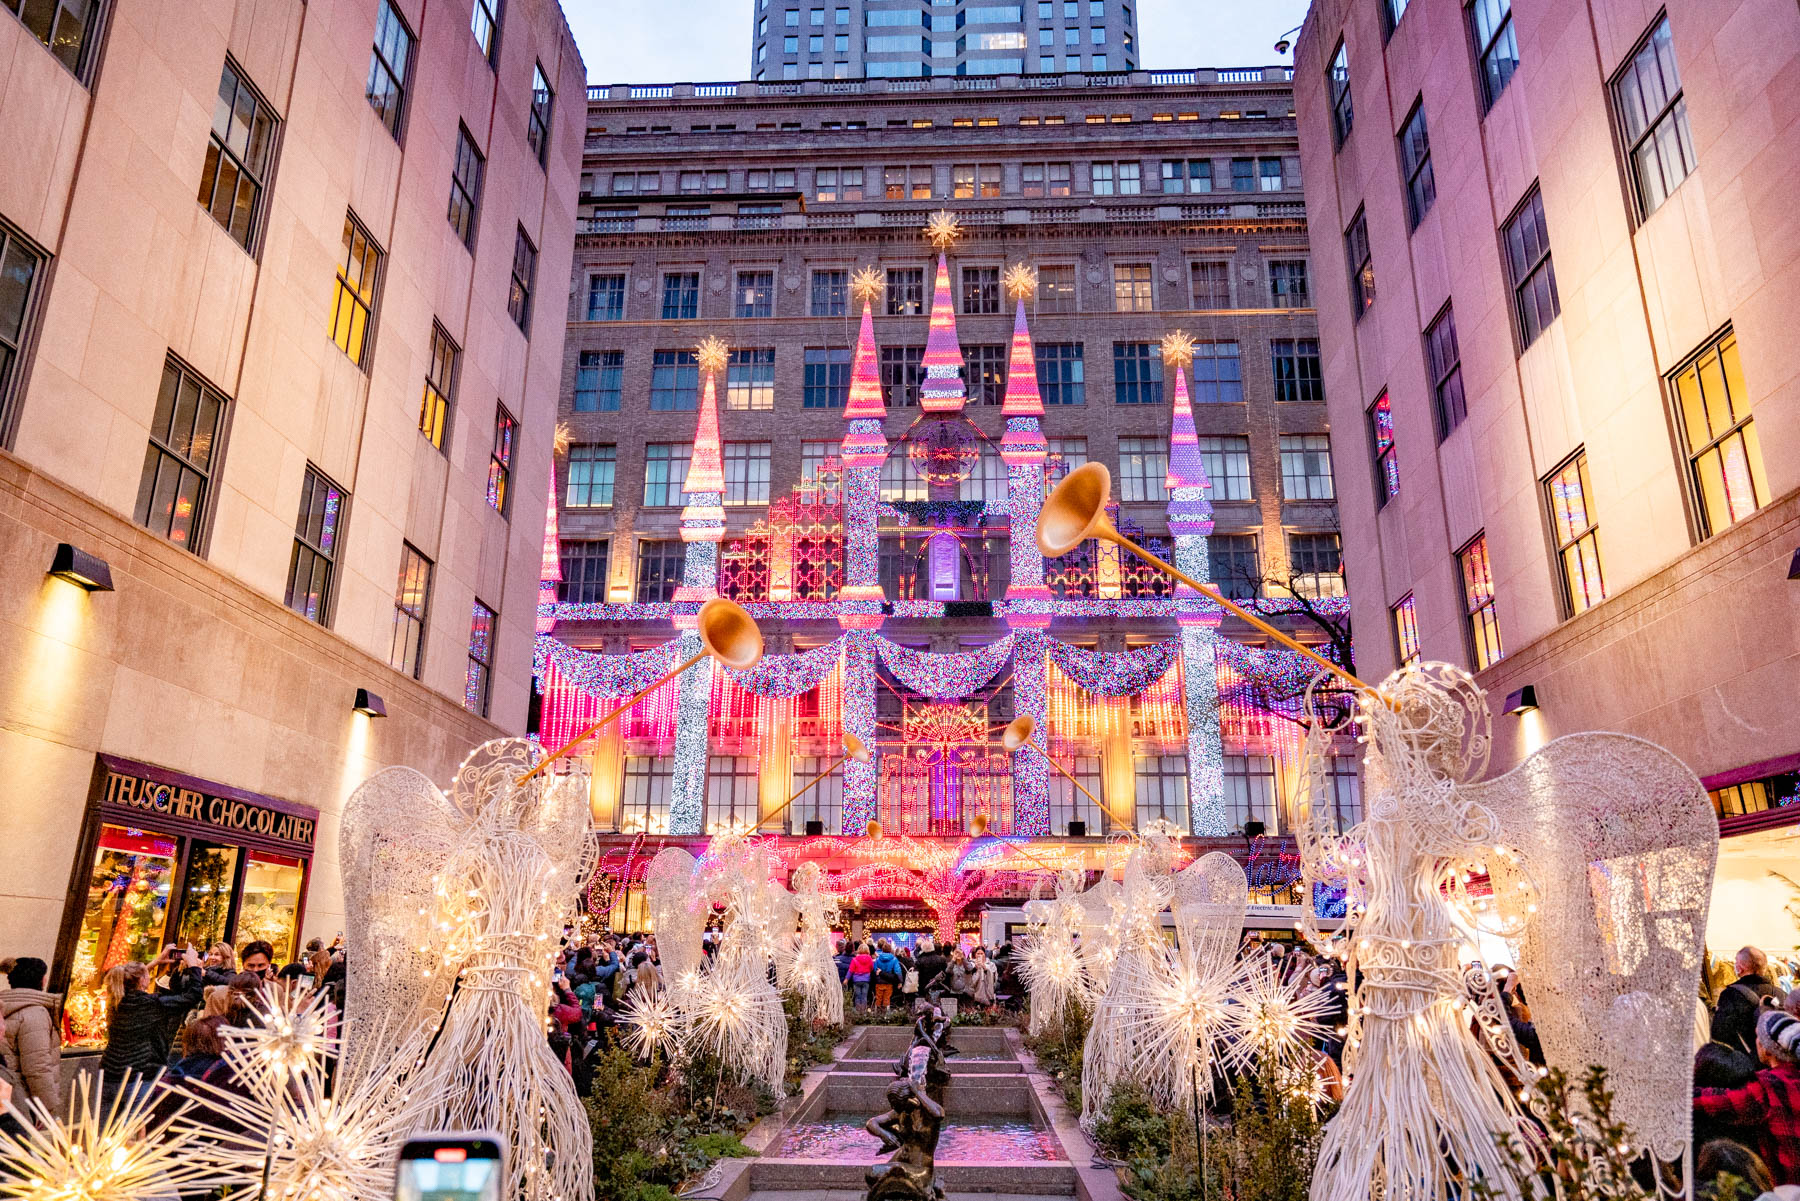 Saks Fifth Light Show
Things to Do for Christmas in NYC with Kids